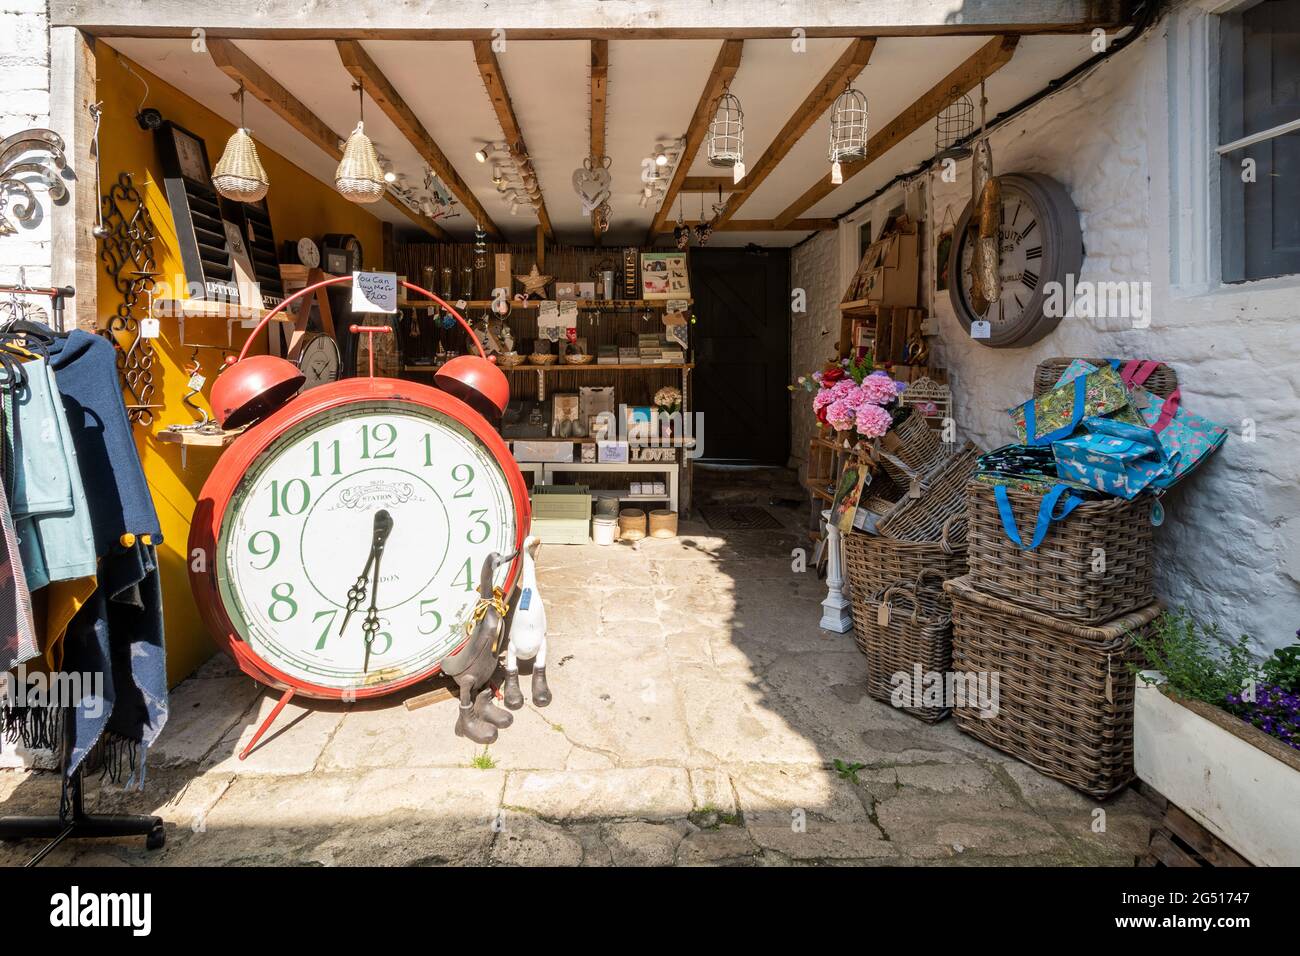 Gift shop in Lacock village, Wiltshire, England UK, with quirky big alarm clock on display and a variety of souvenirs and gifts Stock Photo